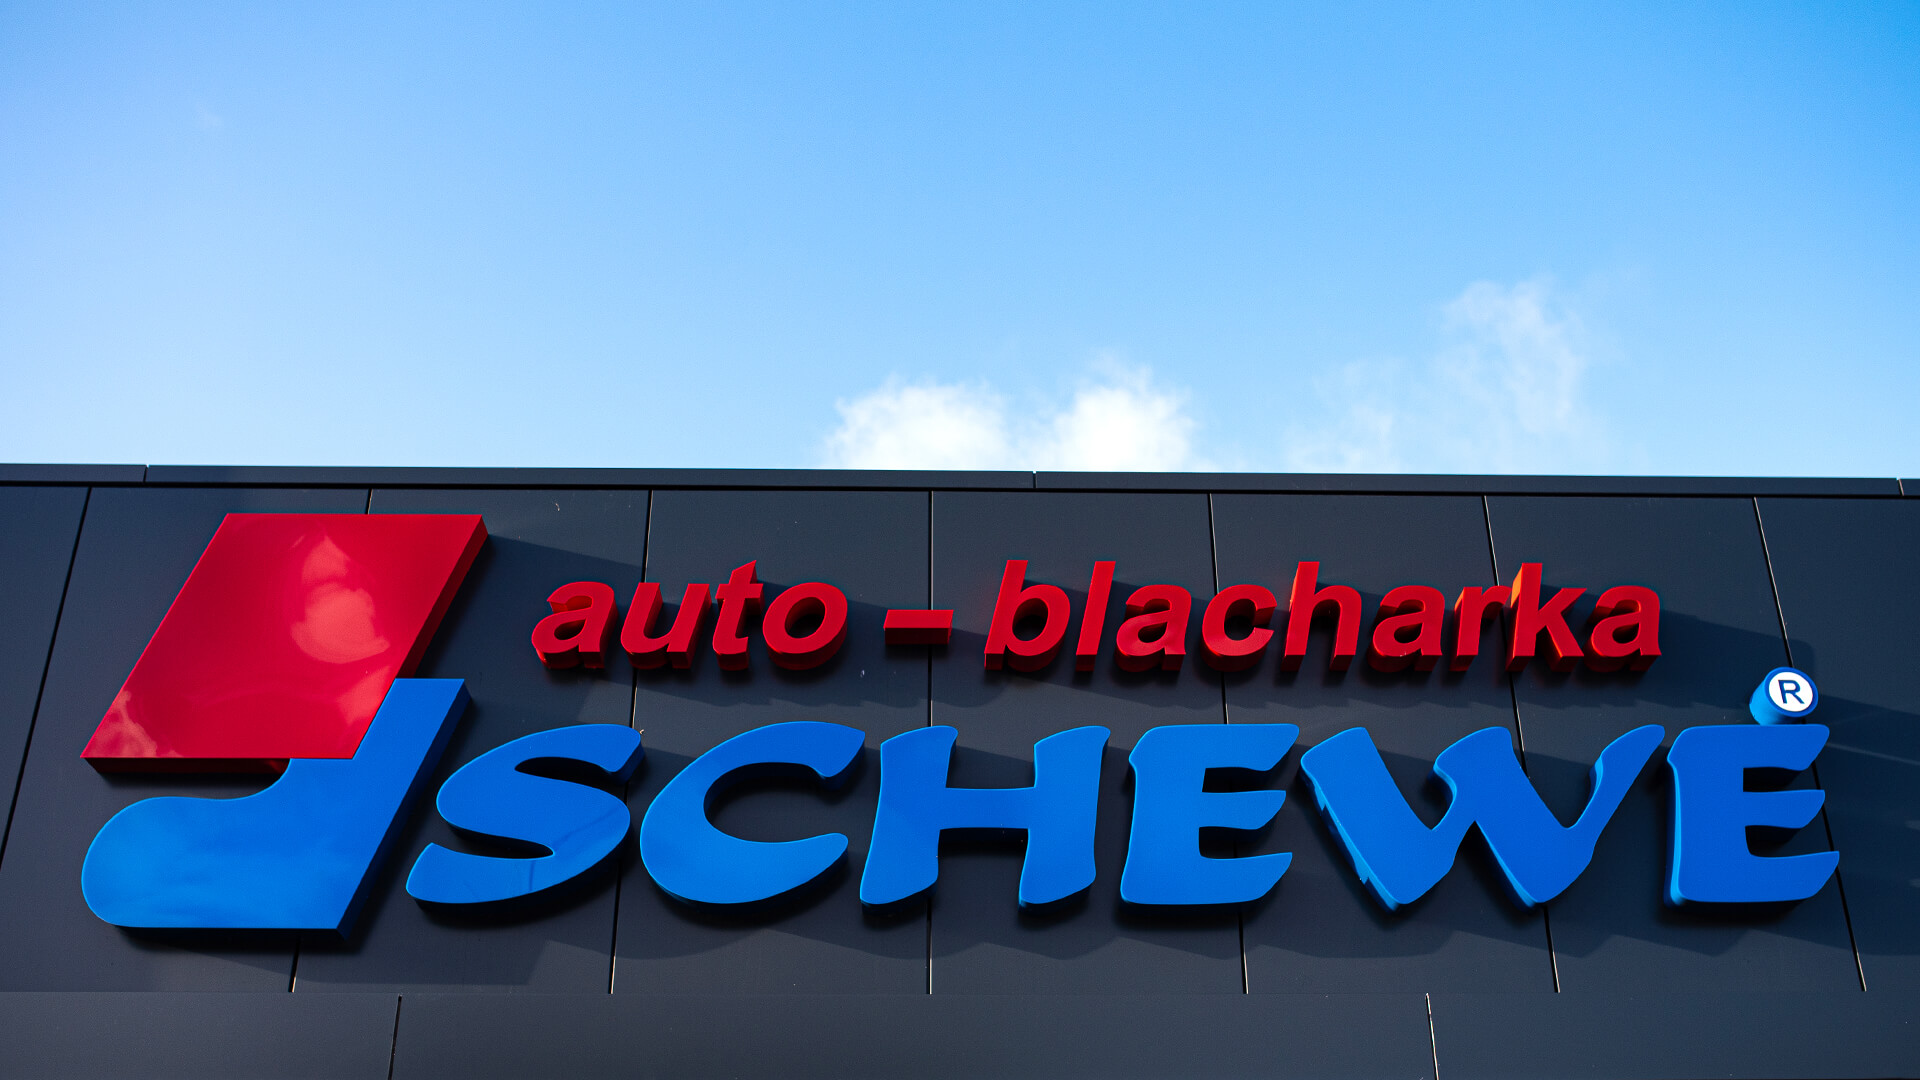 Auto blacharka Schewe - Letters in color, spatial, illuminated LED